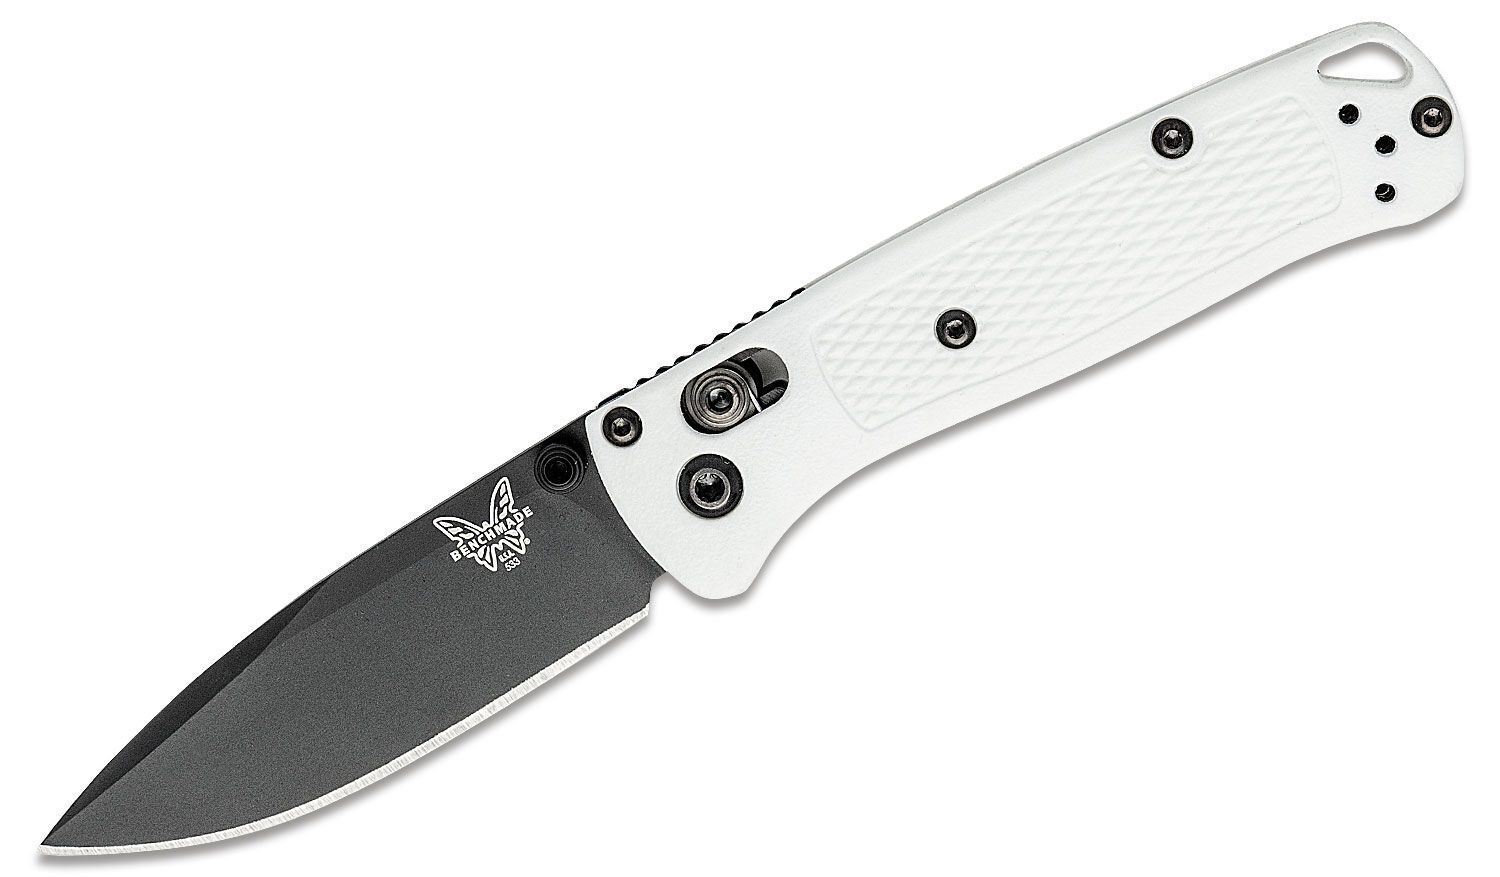 BENCHMADE KNIVES USA 533BK-1 WHITE GRIVORY MINI BUGOUT KNIFE AXIS LOCK MANUAL